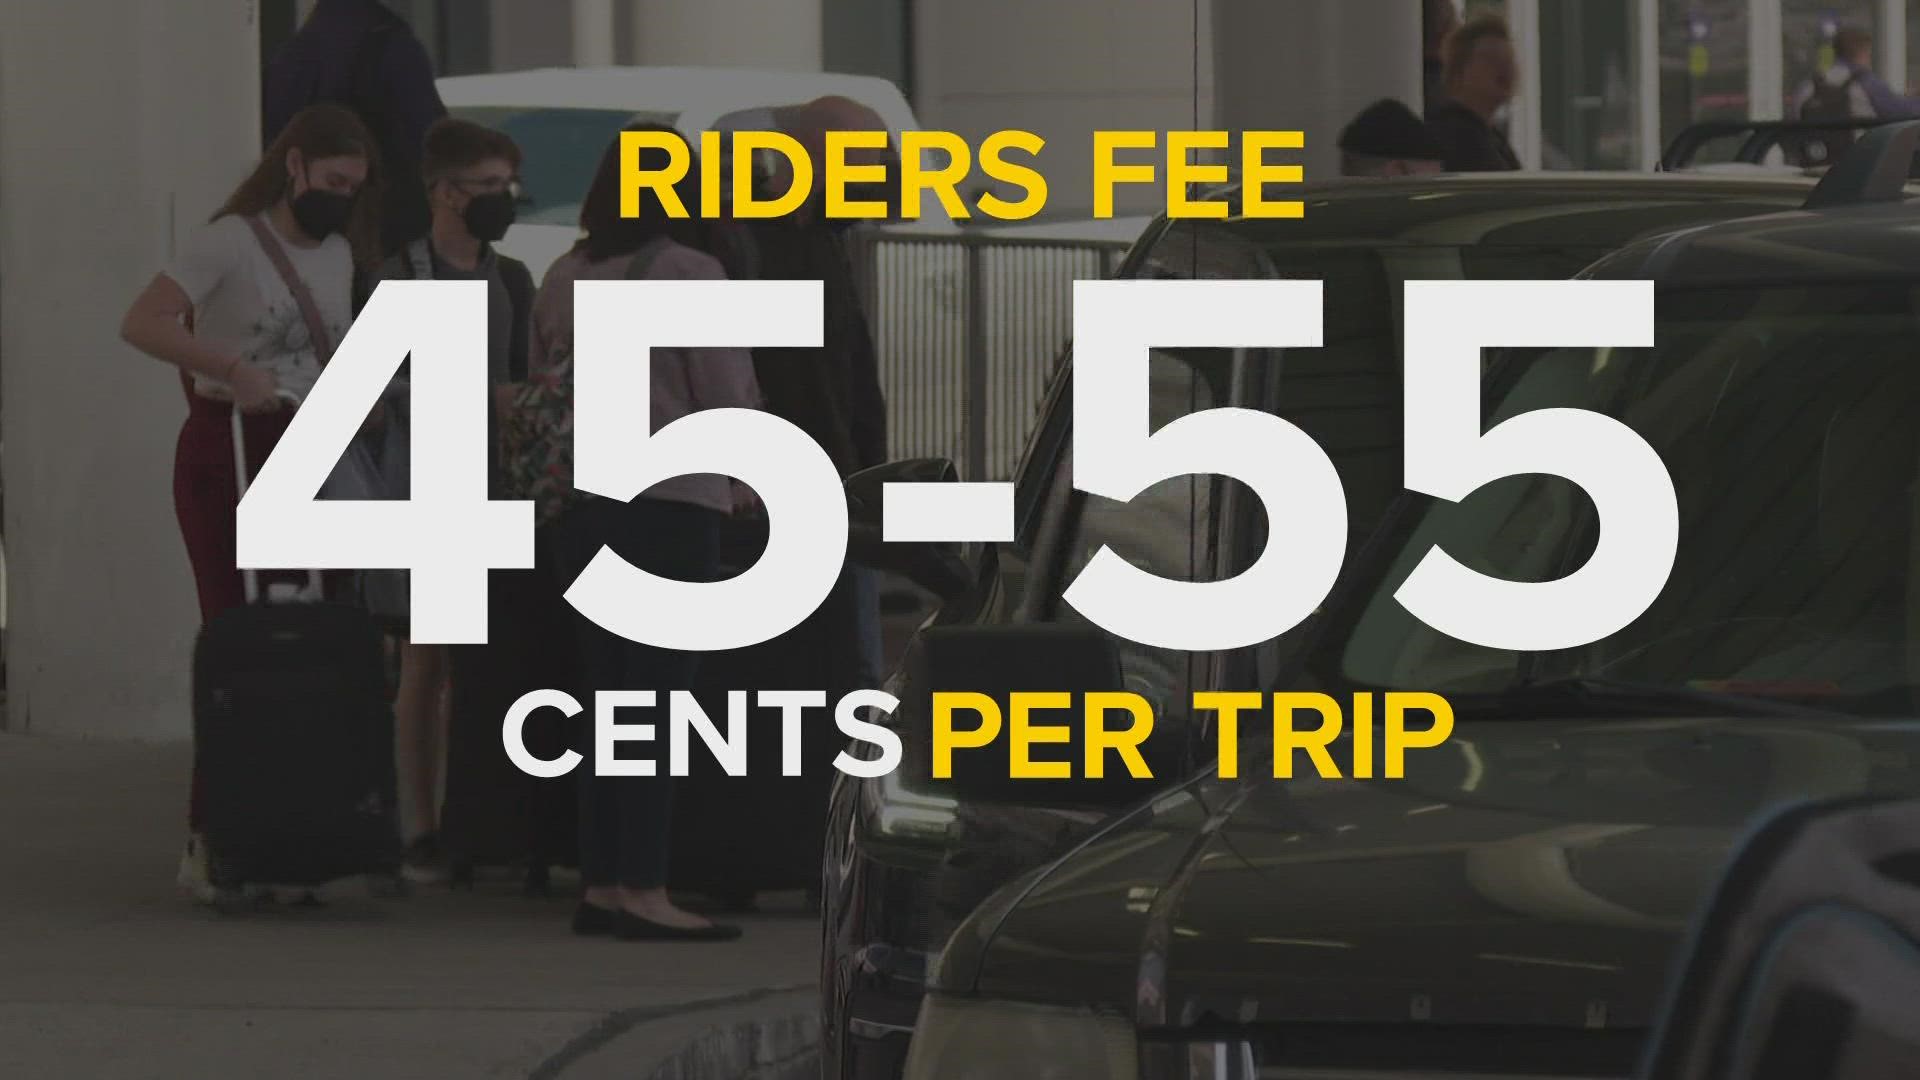 Uber riders will soon have to pay a surcharge to help offset higher fuel costs. All of the money will go to the drivers.